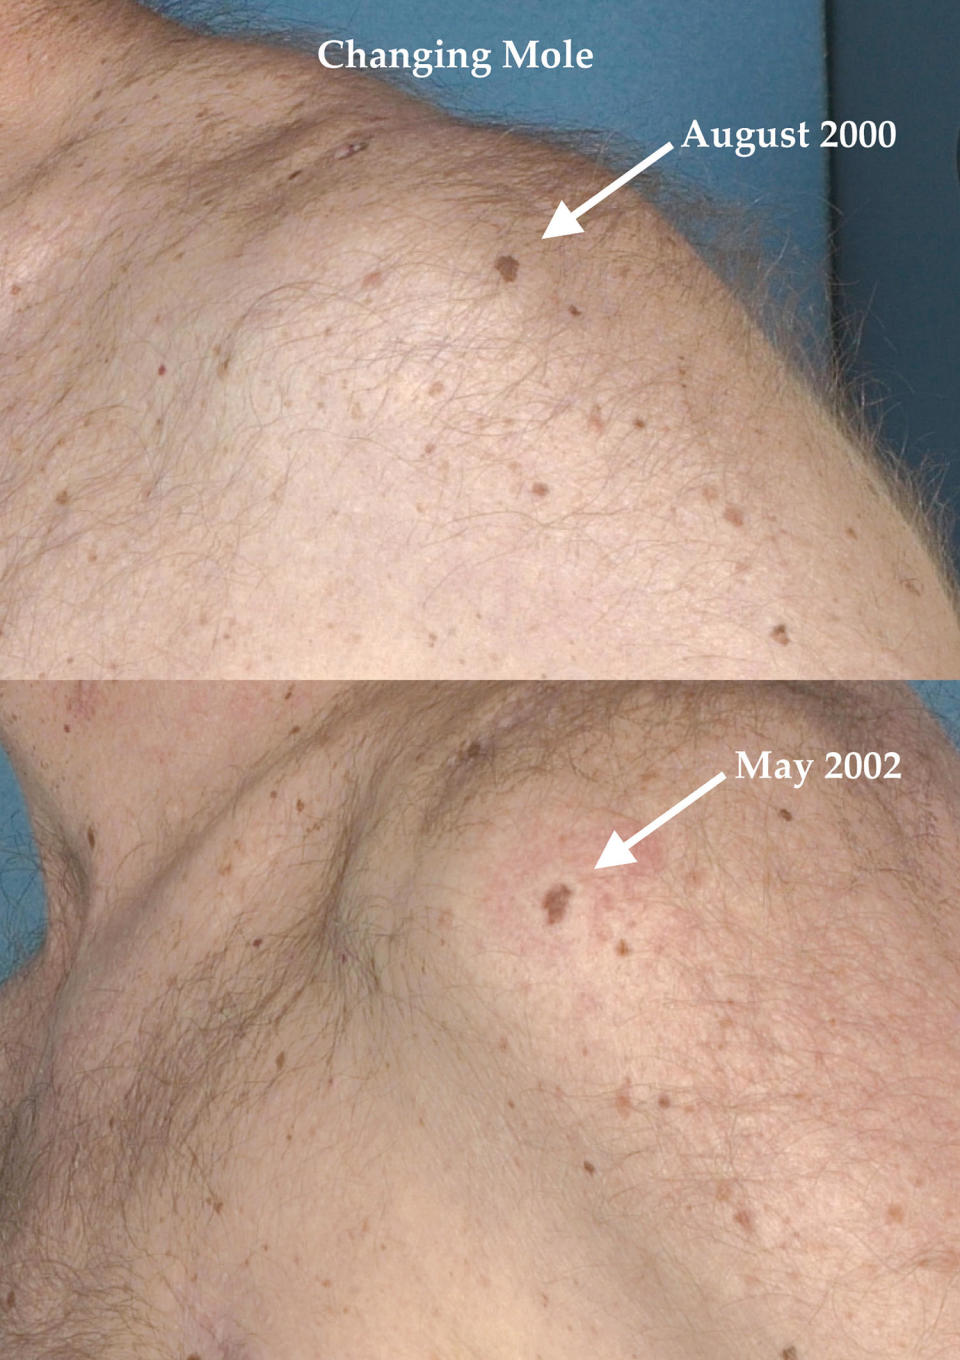 A melanoma that illustrates how cancerous moles may evolve in shape and size over time. (Courtesy The Skin Cancer Foundation)